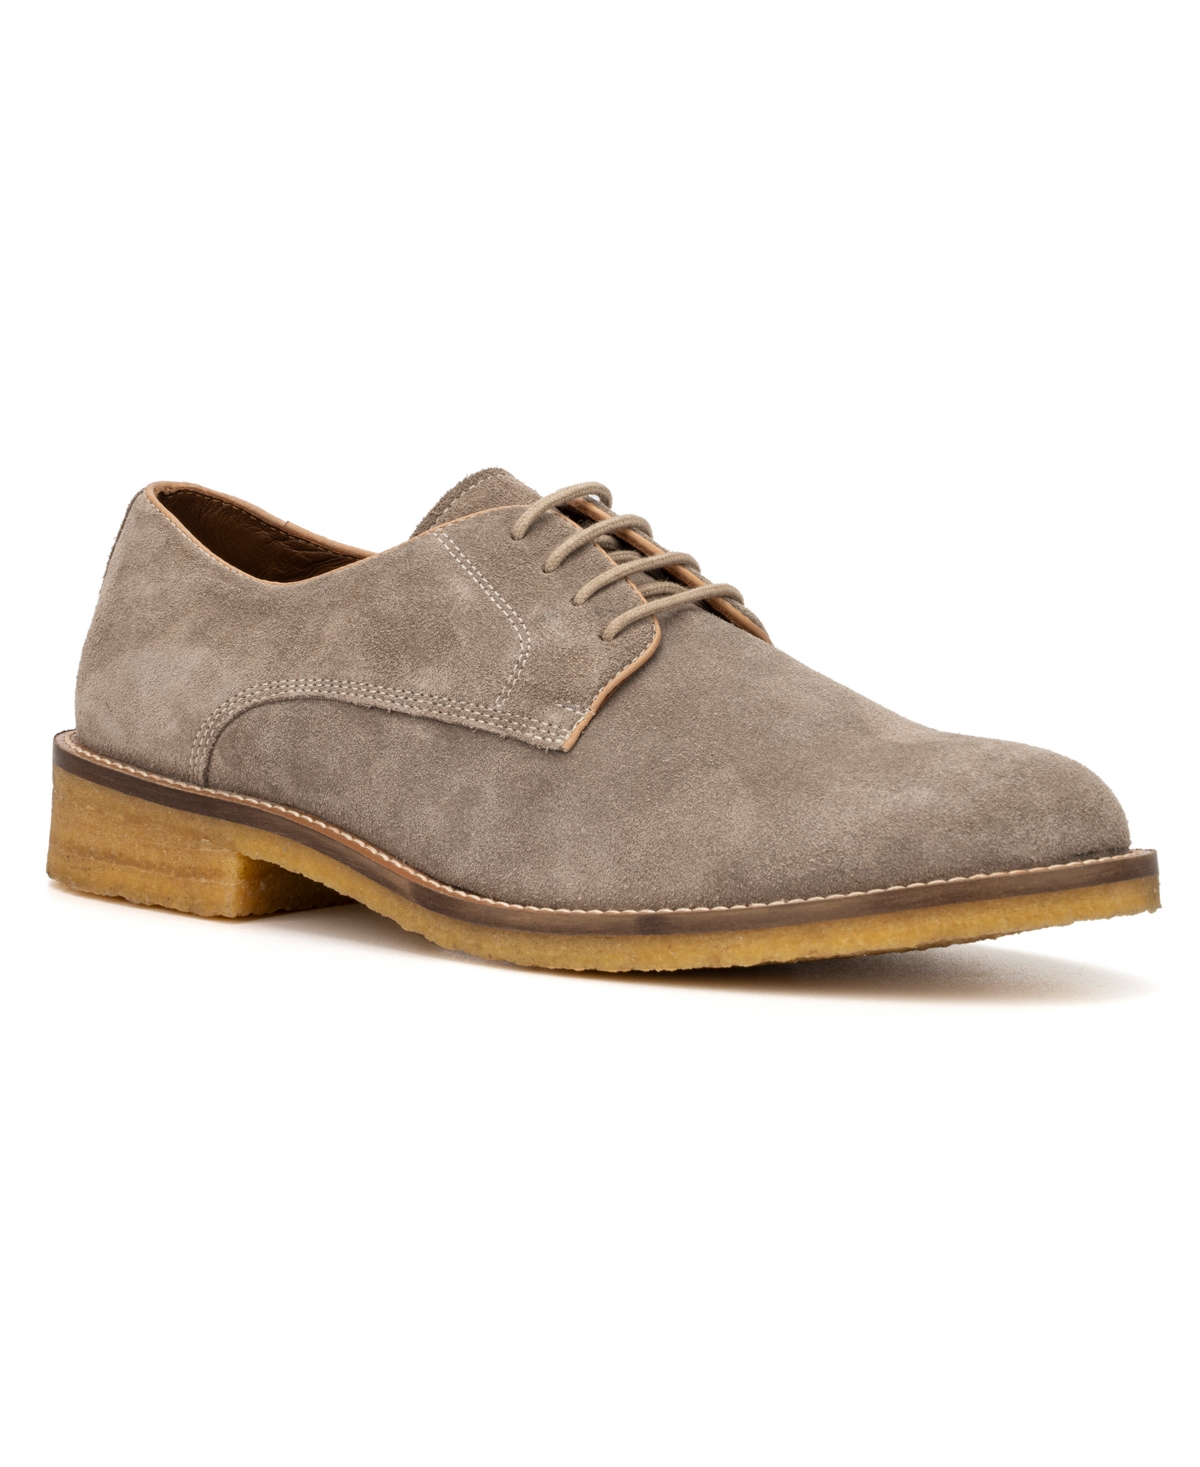 Reserved Footwear Men's Octavious Oxford Shoes In Taupe